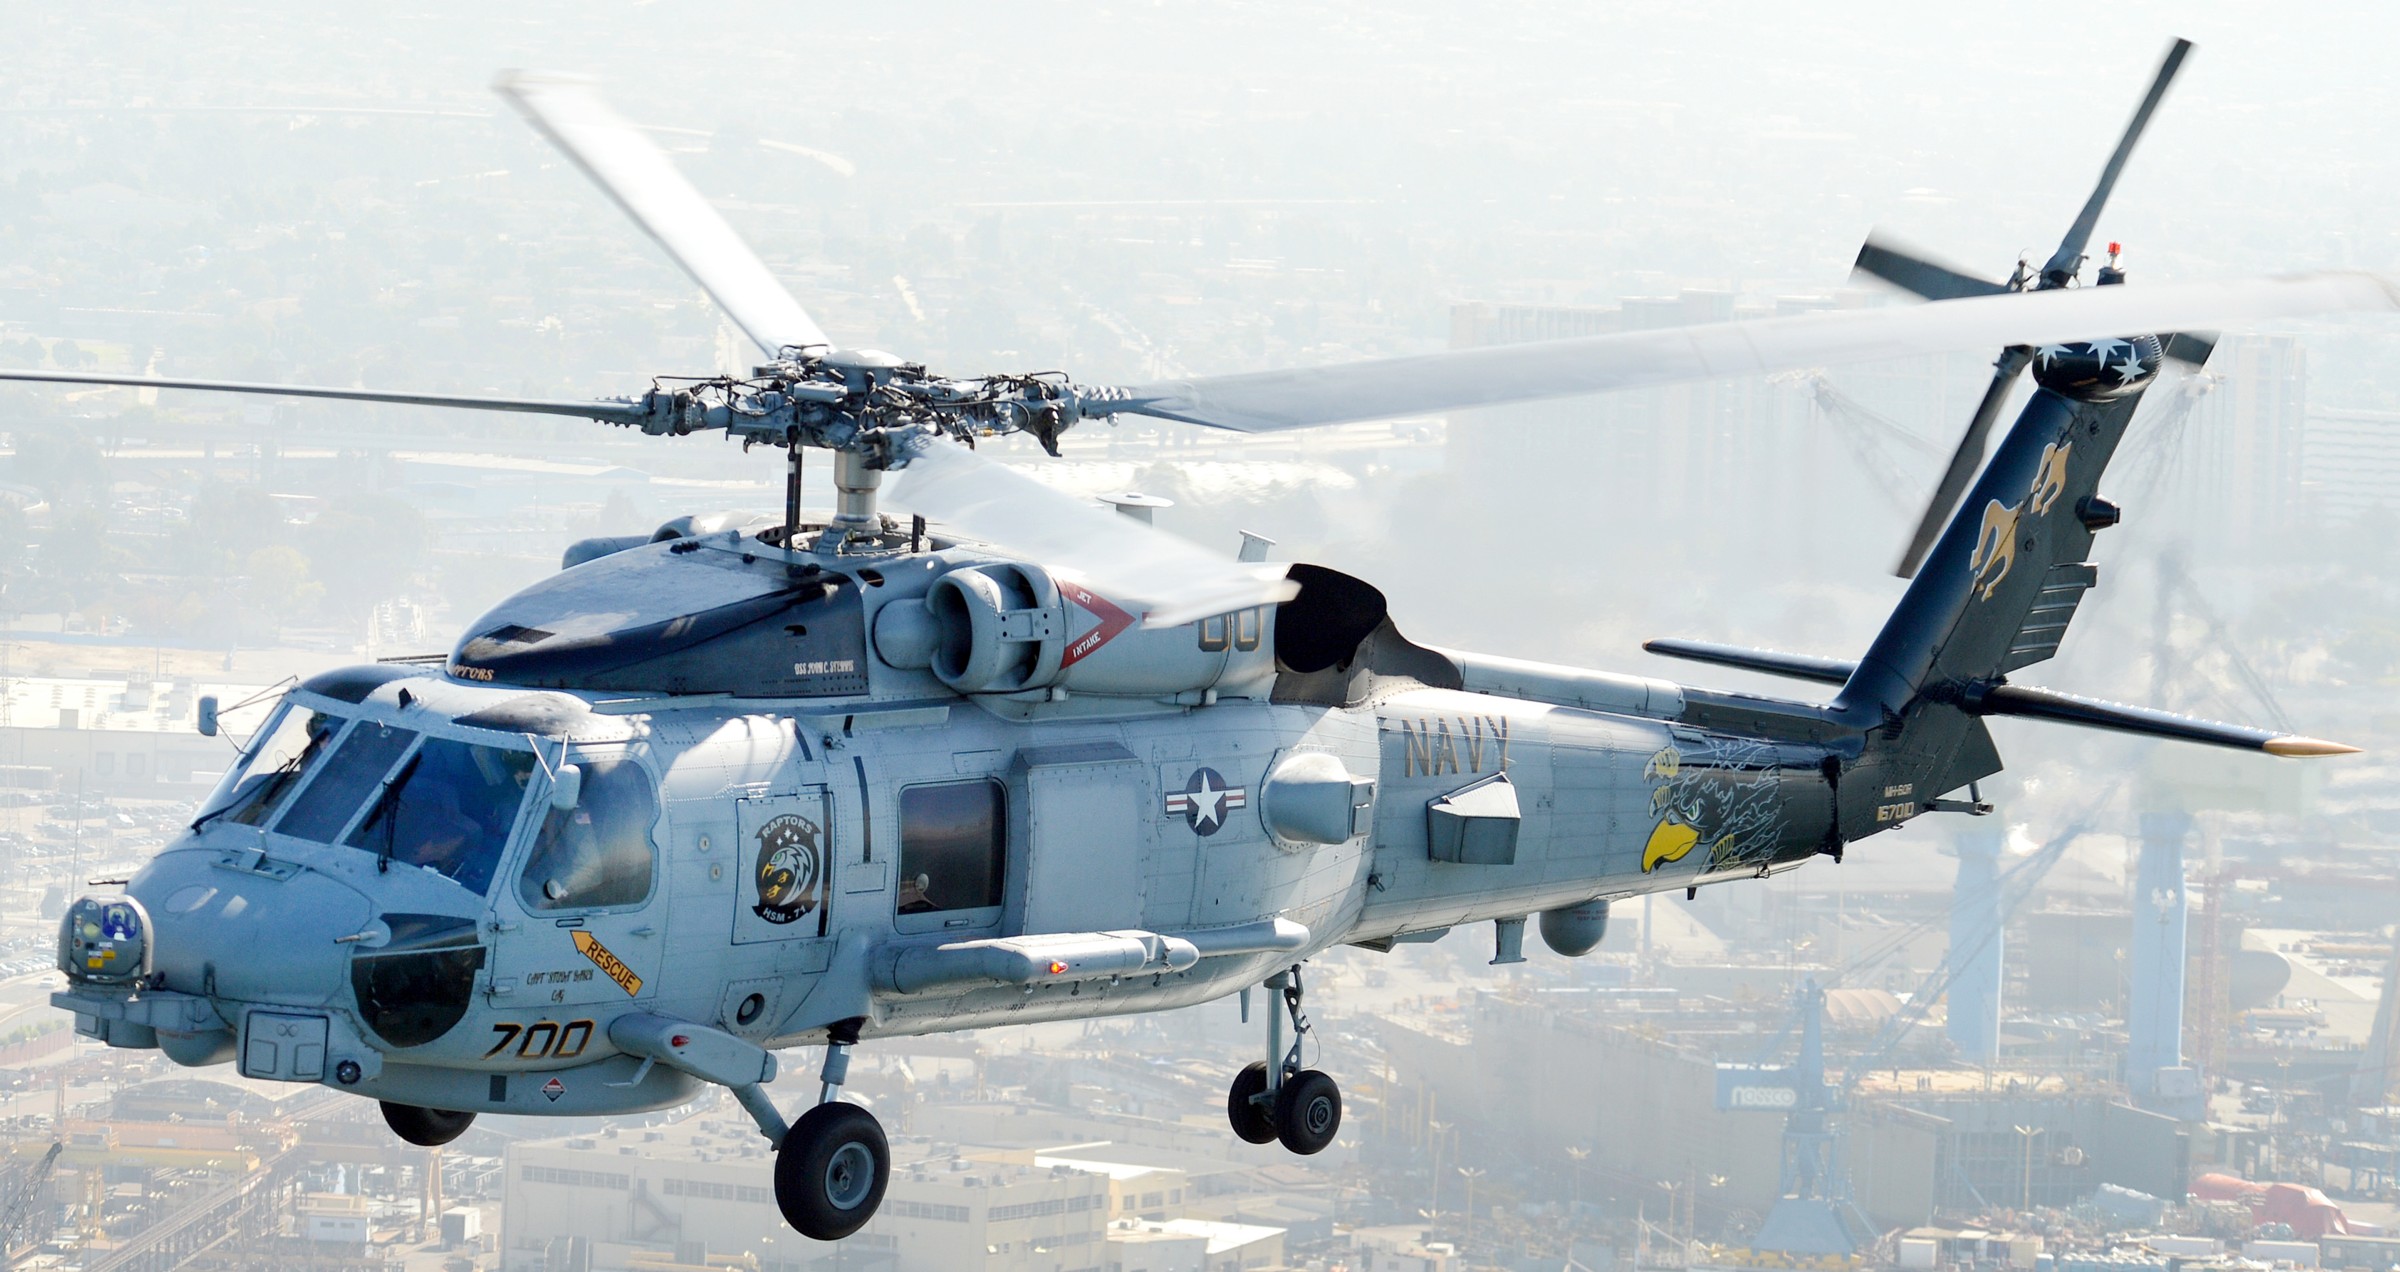 hsm-71 raptors helicopter maritime strike squadron mh-60r seahawk navy 2014 65